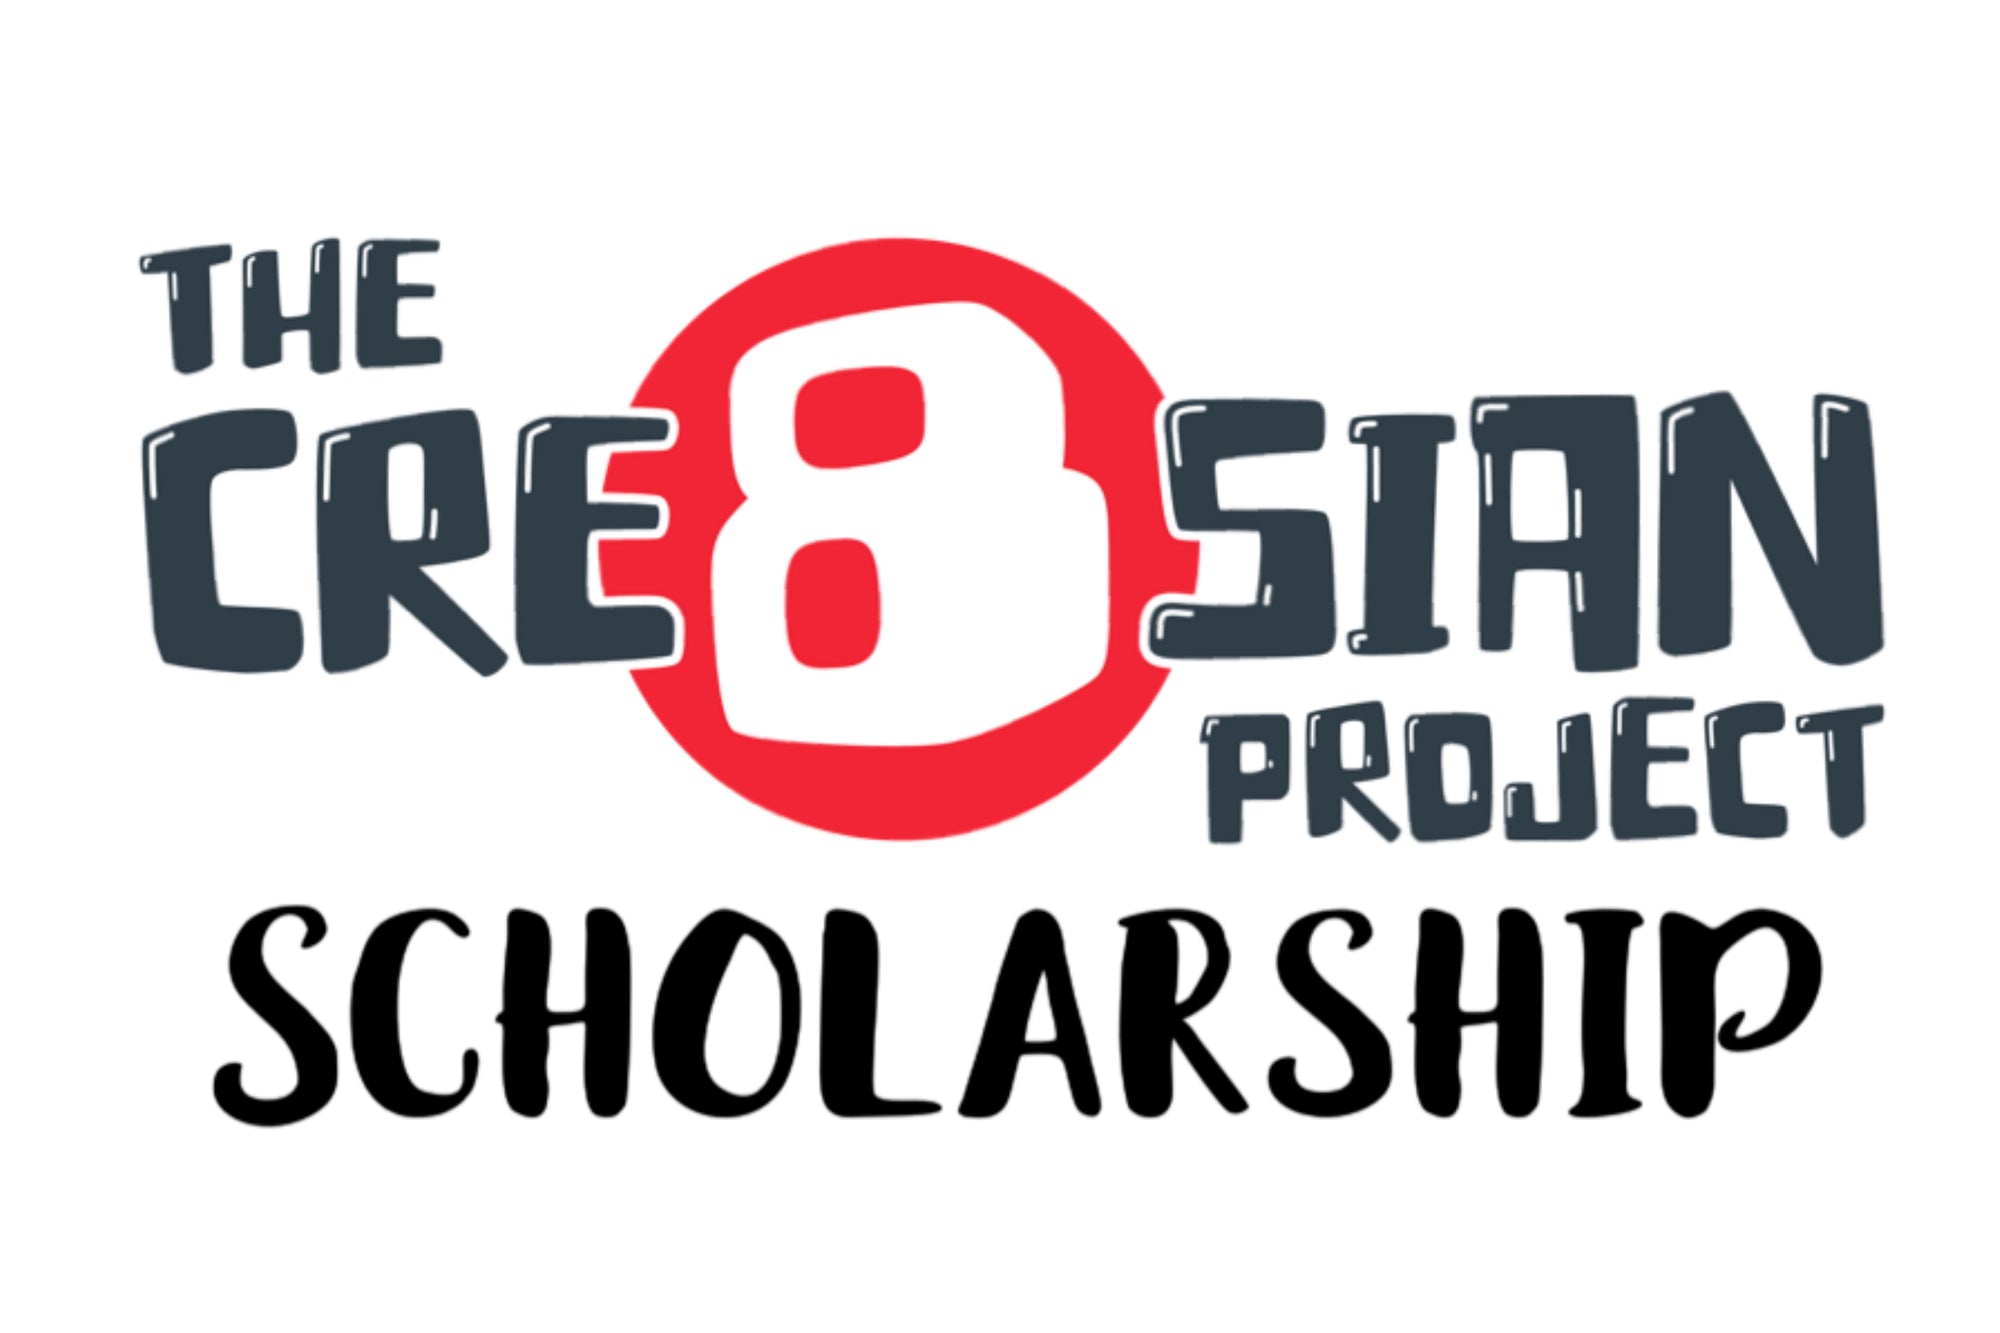 Announcing the 2022-23 Cre8sian Project Scholarships!